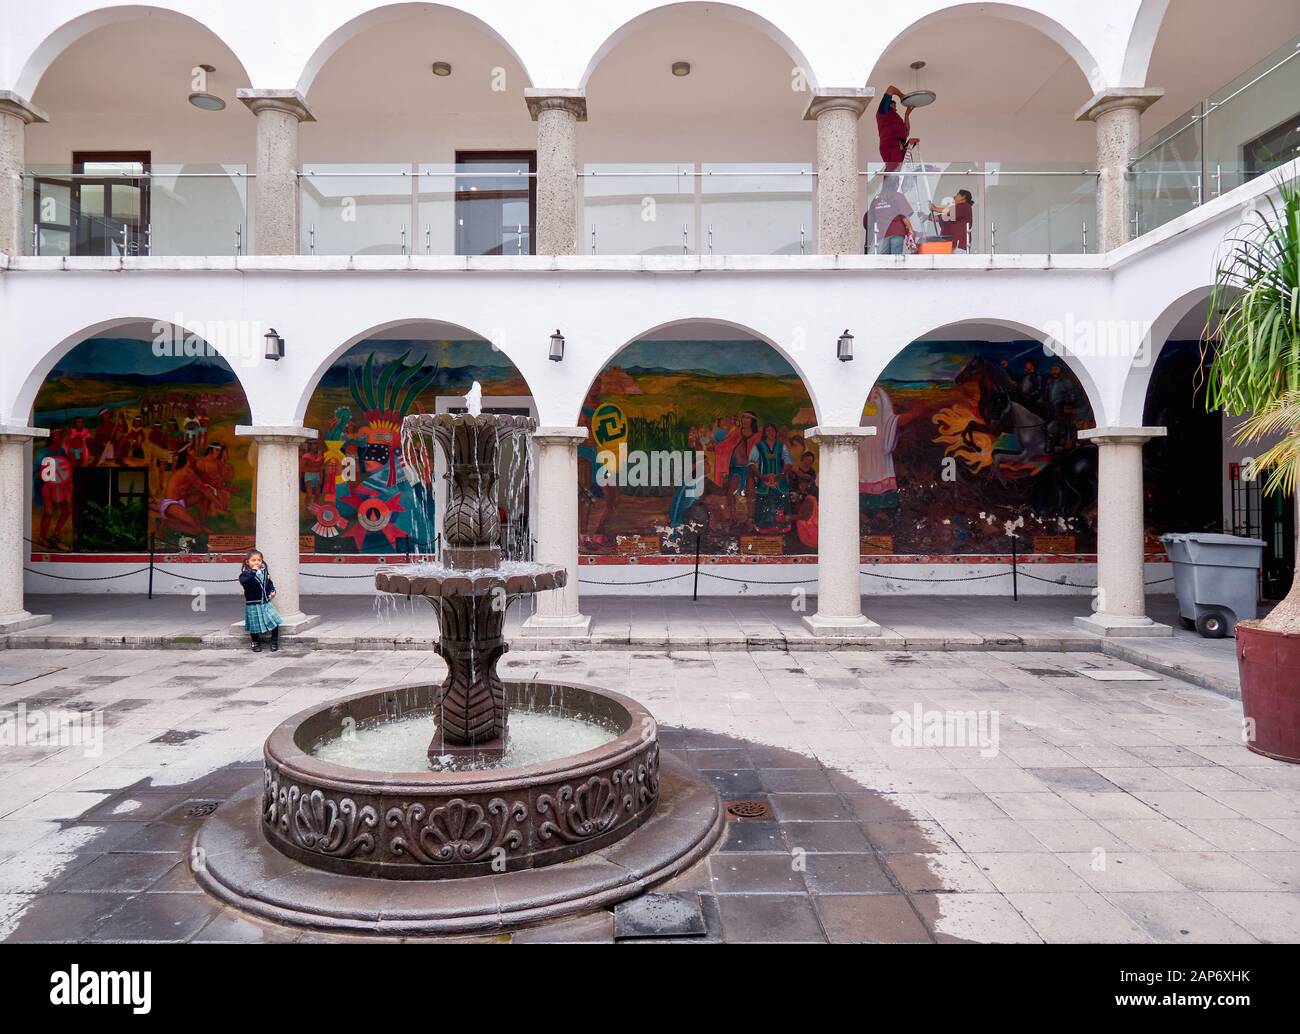 San Pedro Cholula, Mexico, October 17, 2018 - Inner square with porch and fountain of San Pedro Cholula city hall. Stock Photo